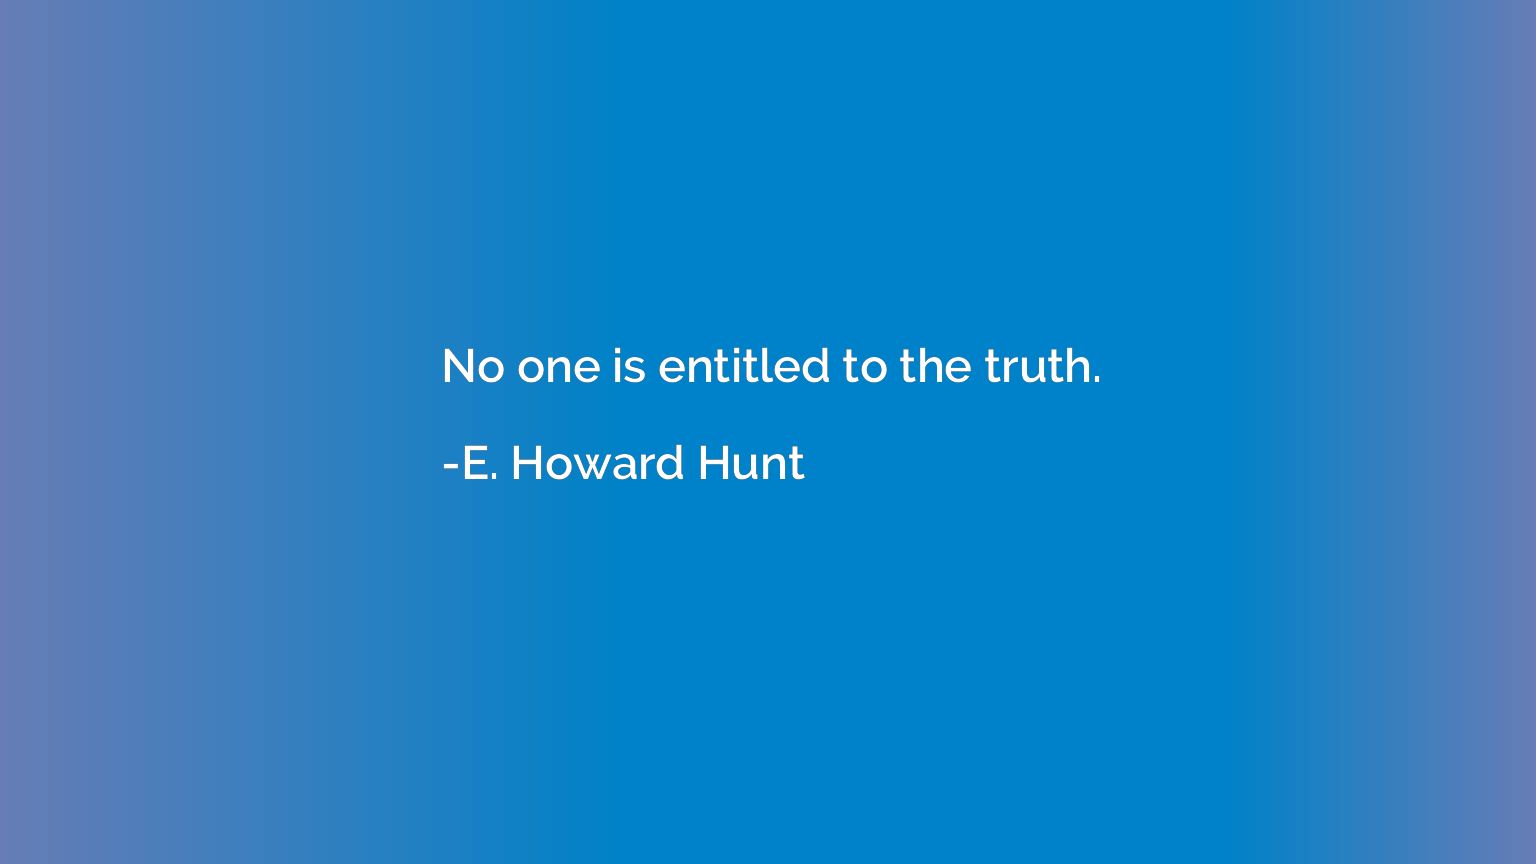 No one is entitled to the truth.